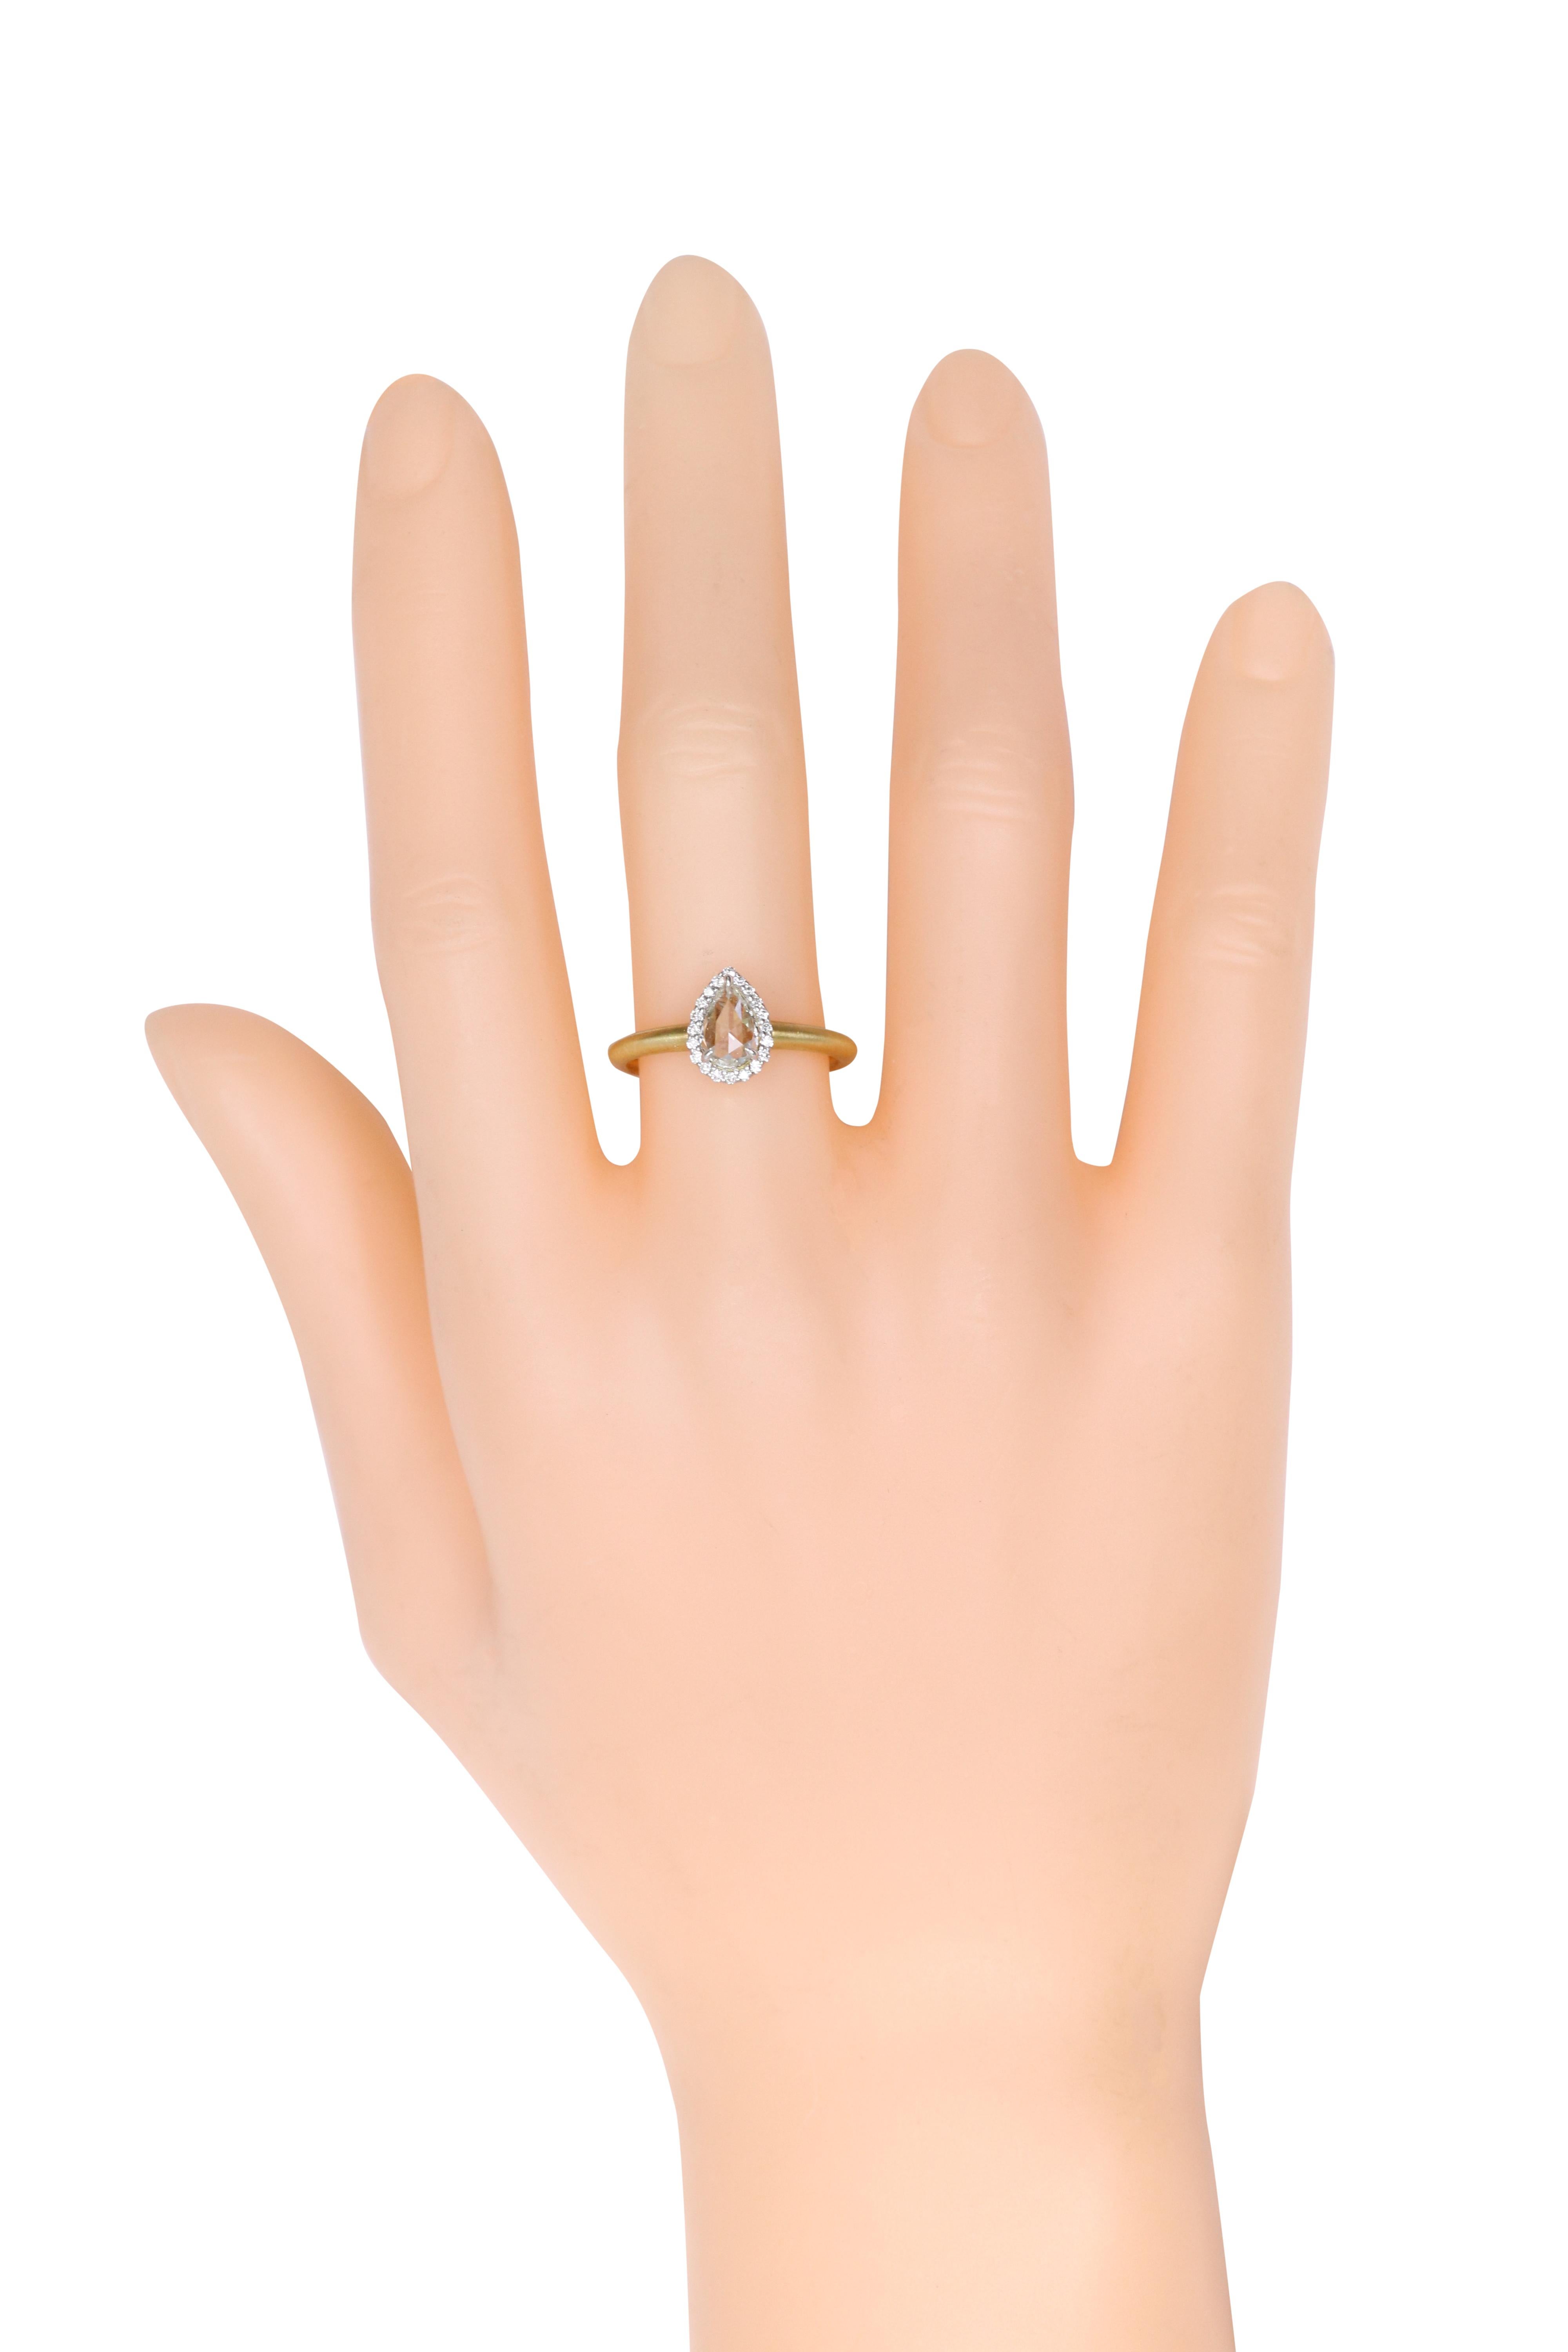 18 Karat Gold 0.63 Carat Solitaire Engagement Ring

Solitaires compliment the queen, and you ladies are our charismatic queens. Yes, we said it! Adding to your bold gaze and strong mind, we bring to you this gorgeous solitaire diamond ring. You